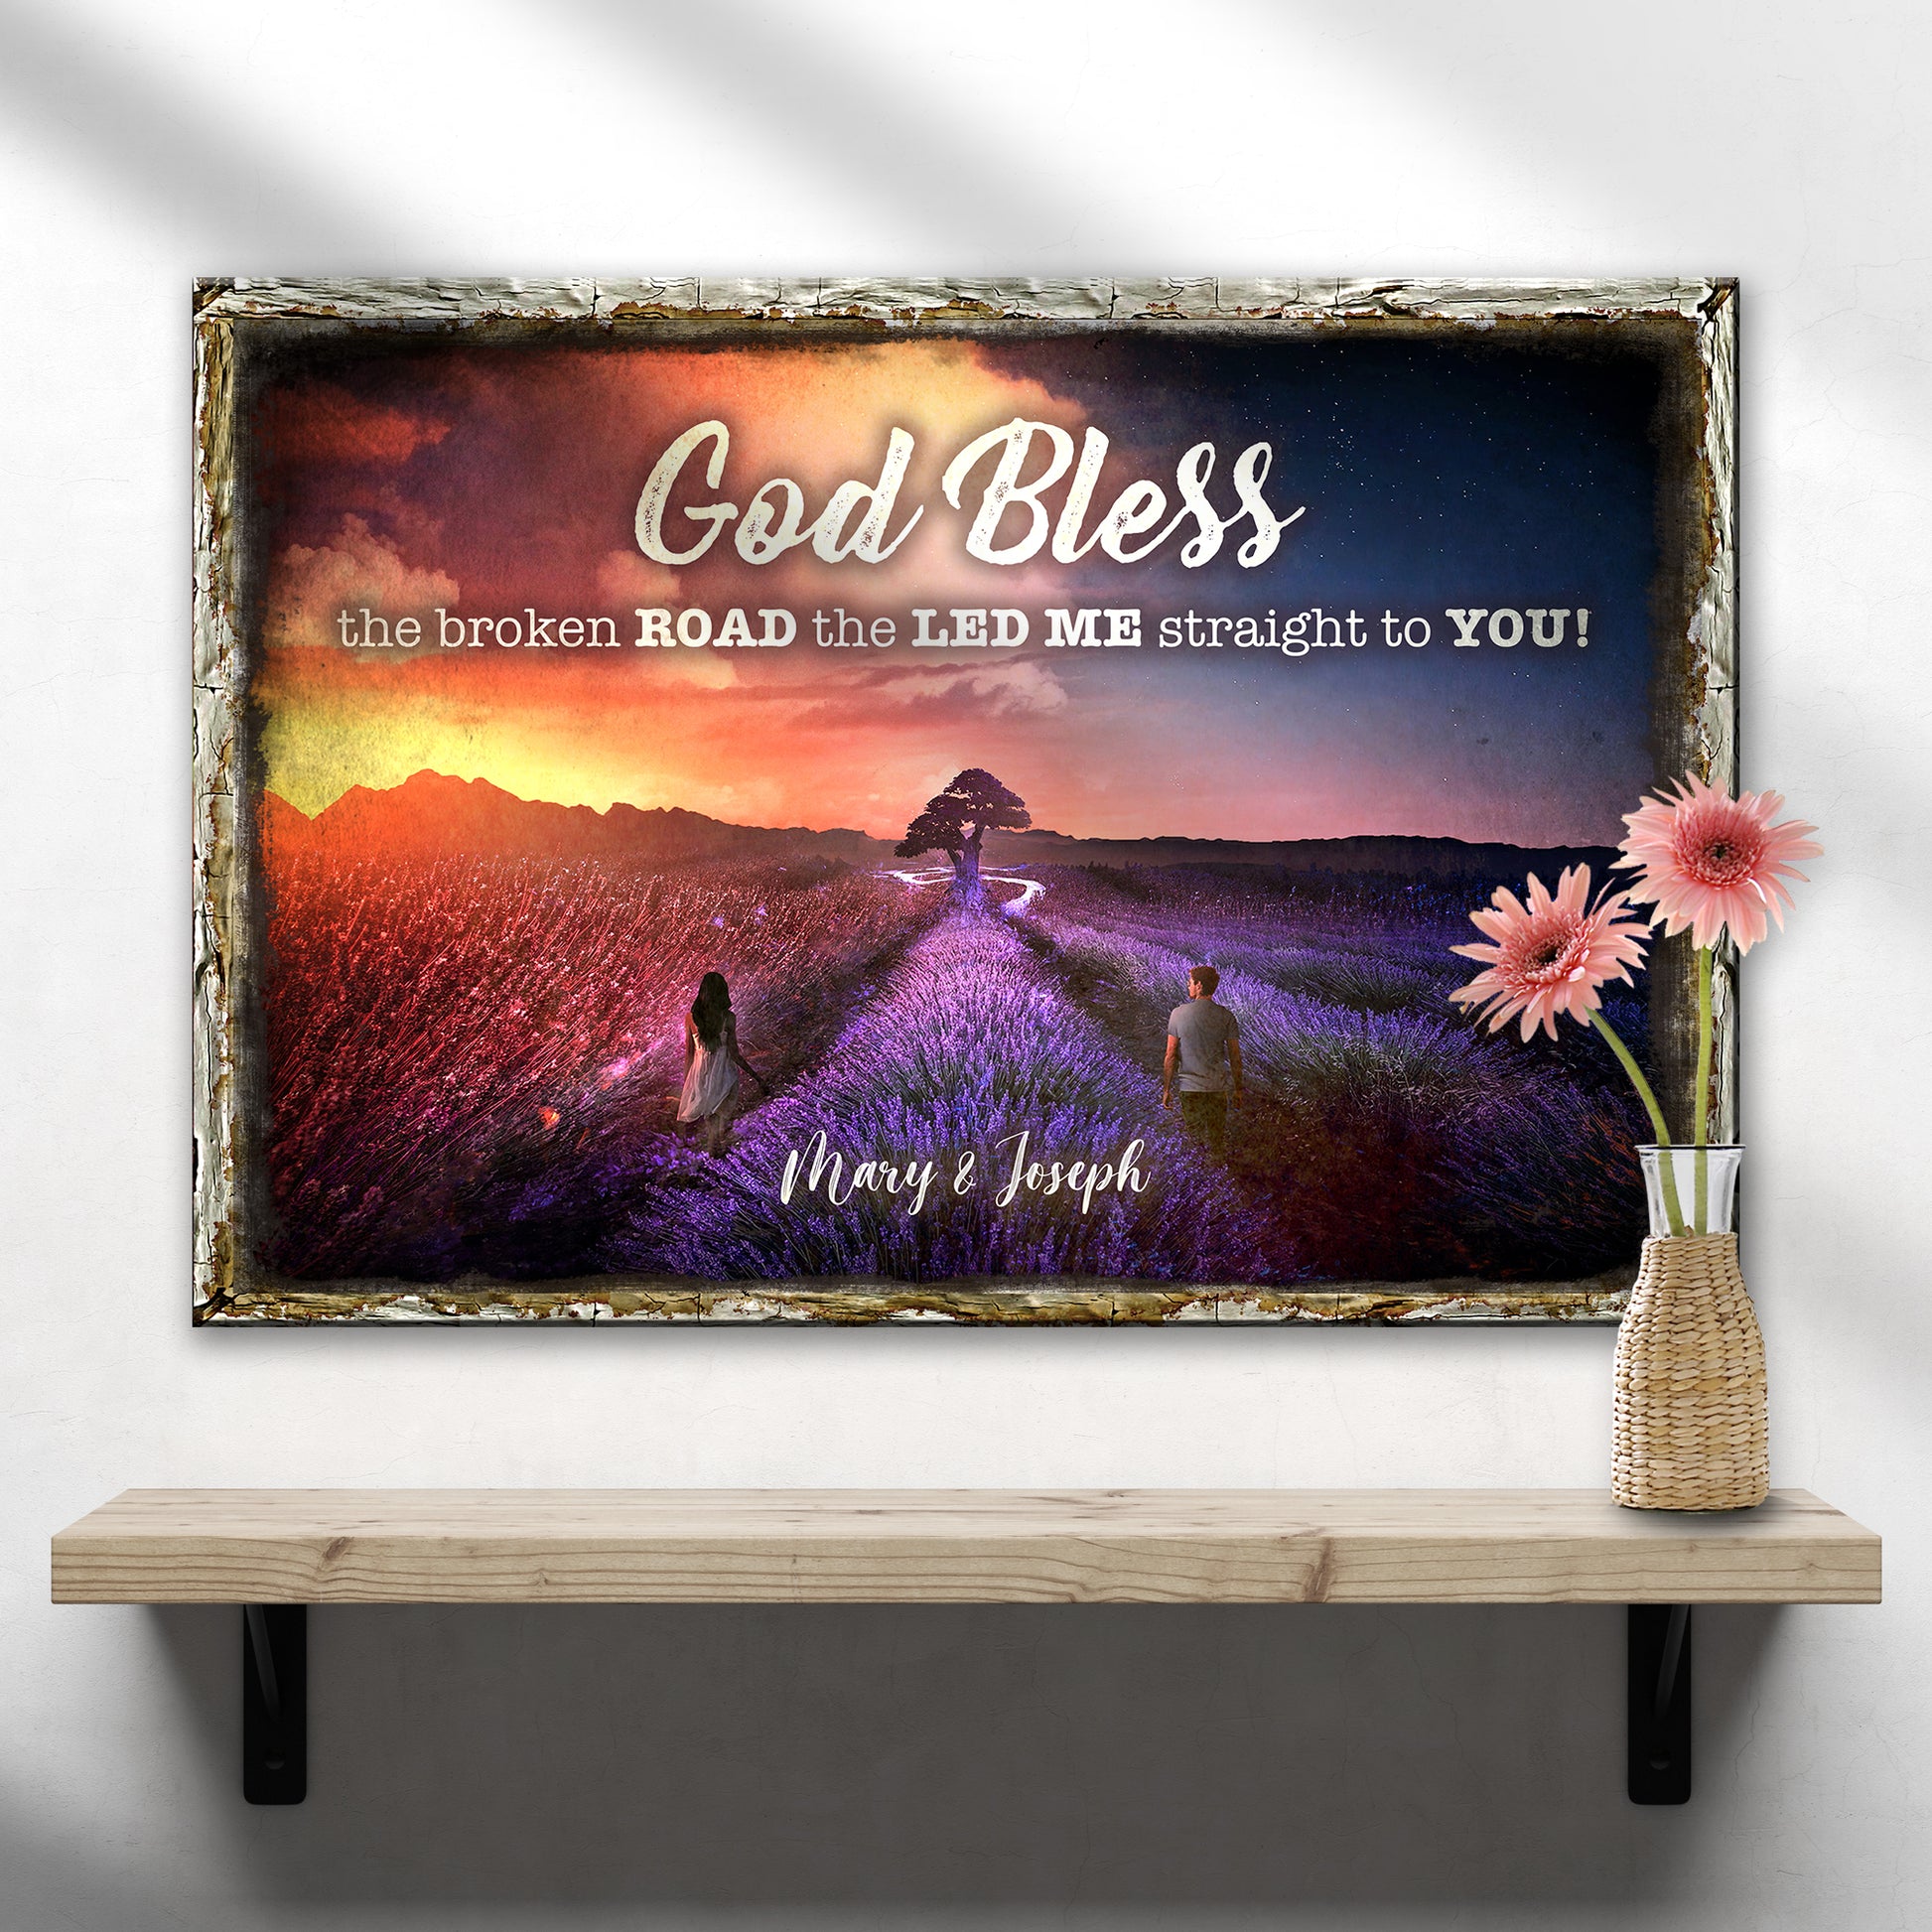 God Bless The Broken Road Sign - Image by Tailored Canvases